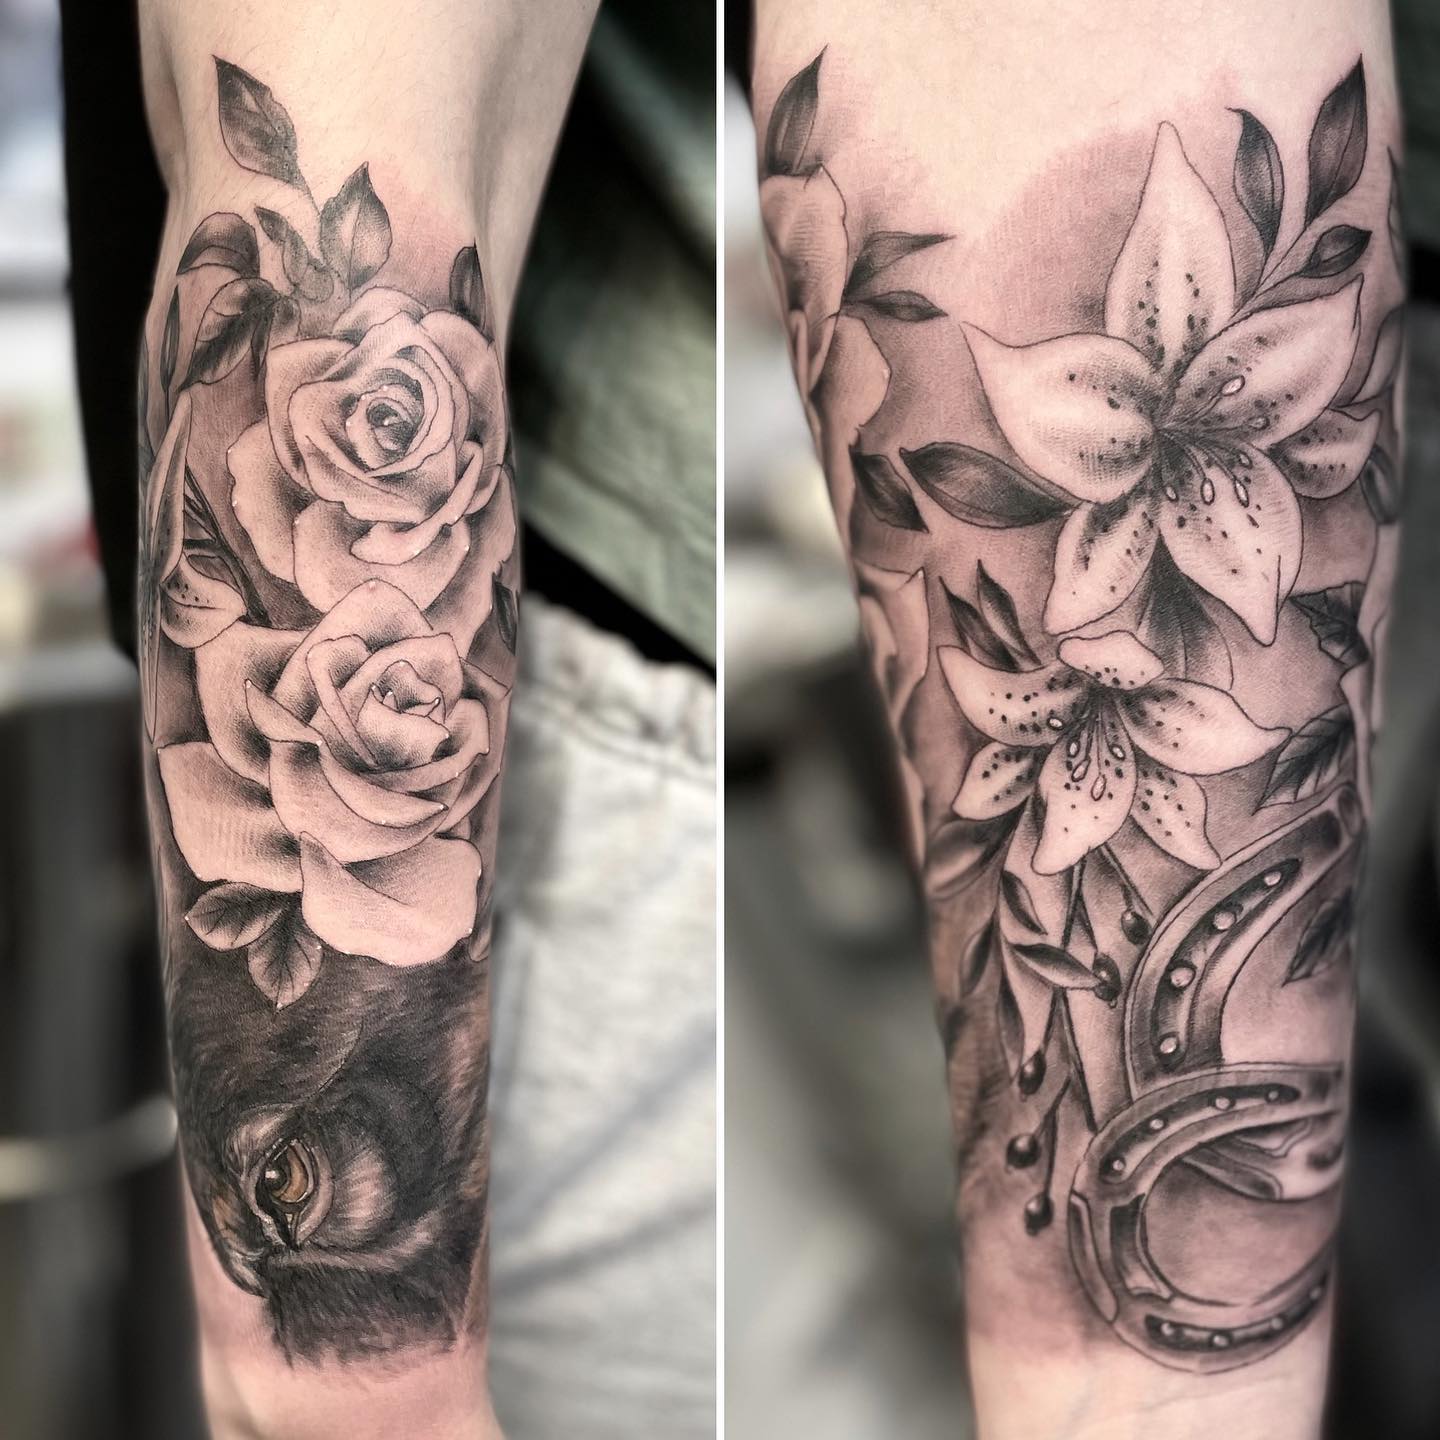 30+ Unique Lily Tattoo Design Ideas You Would Love to Have - 100 Tattoos